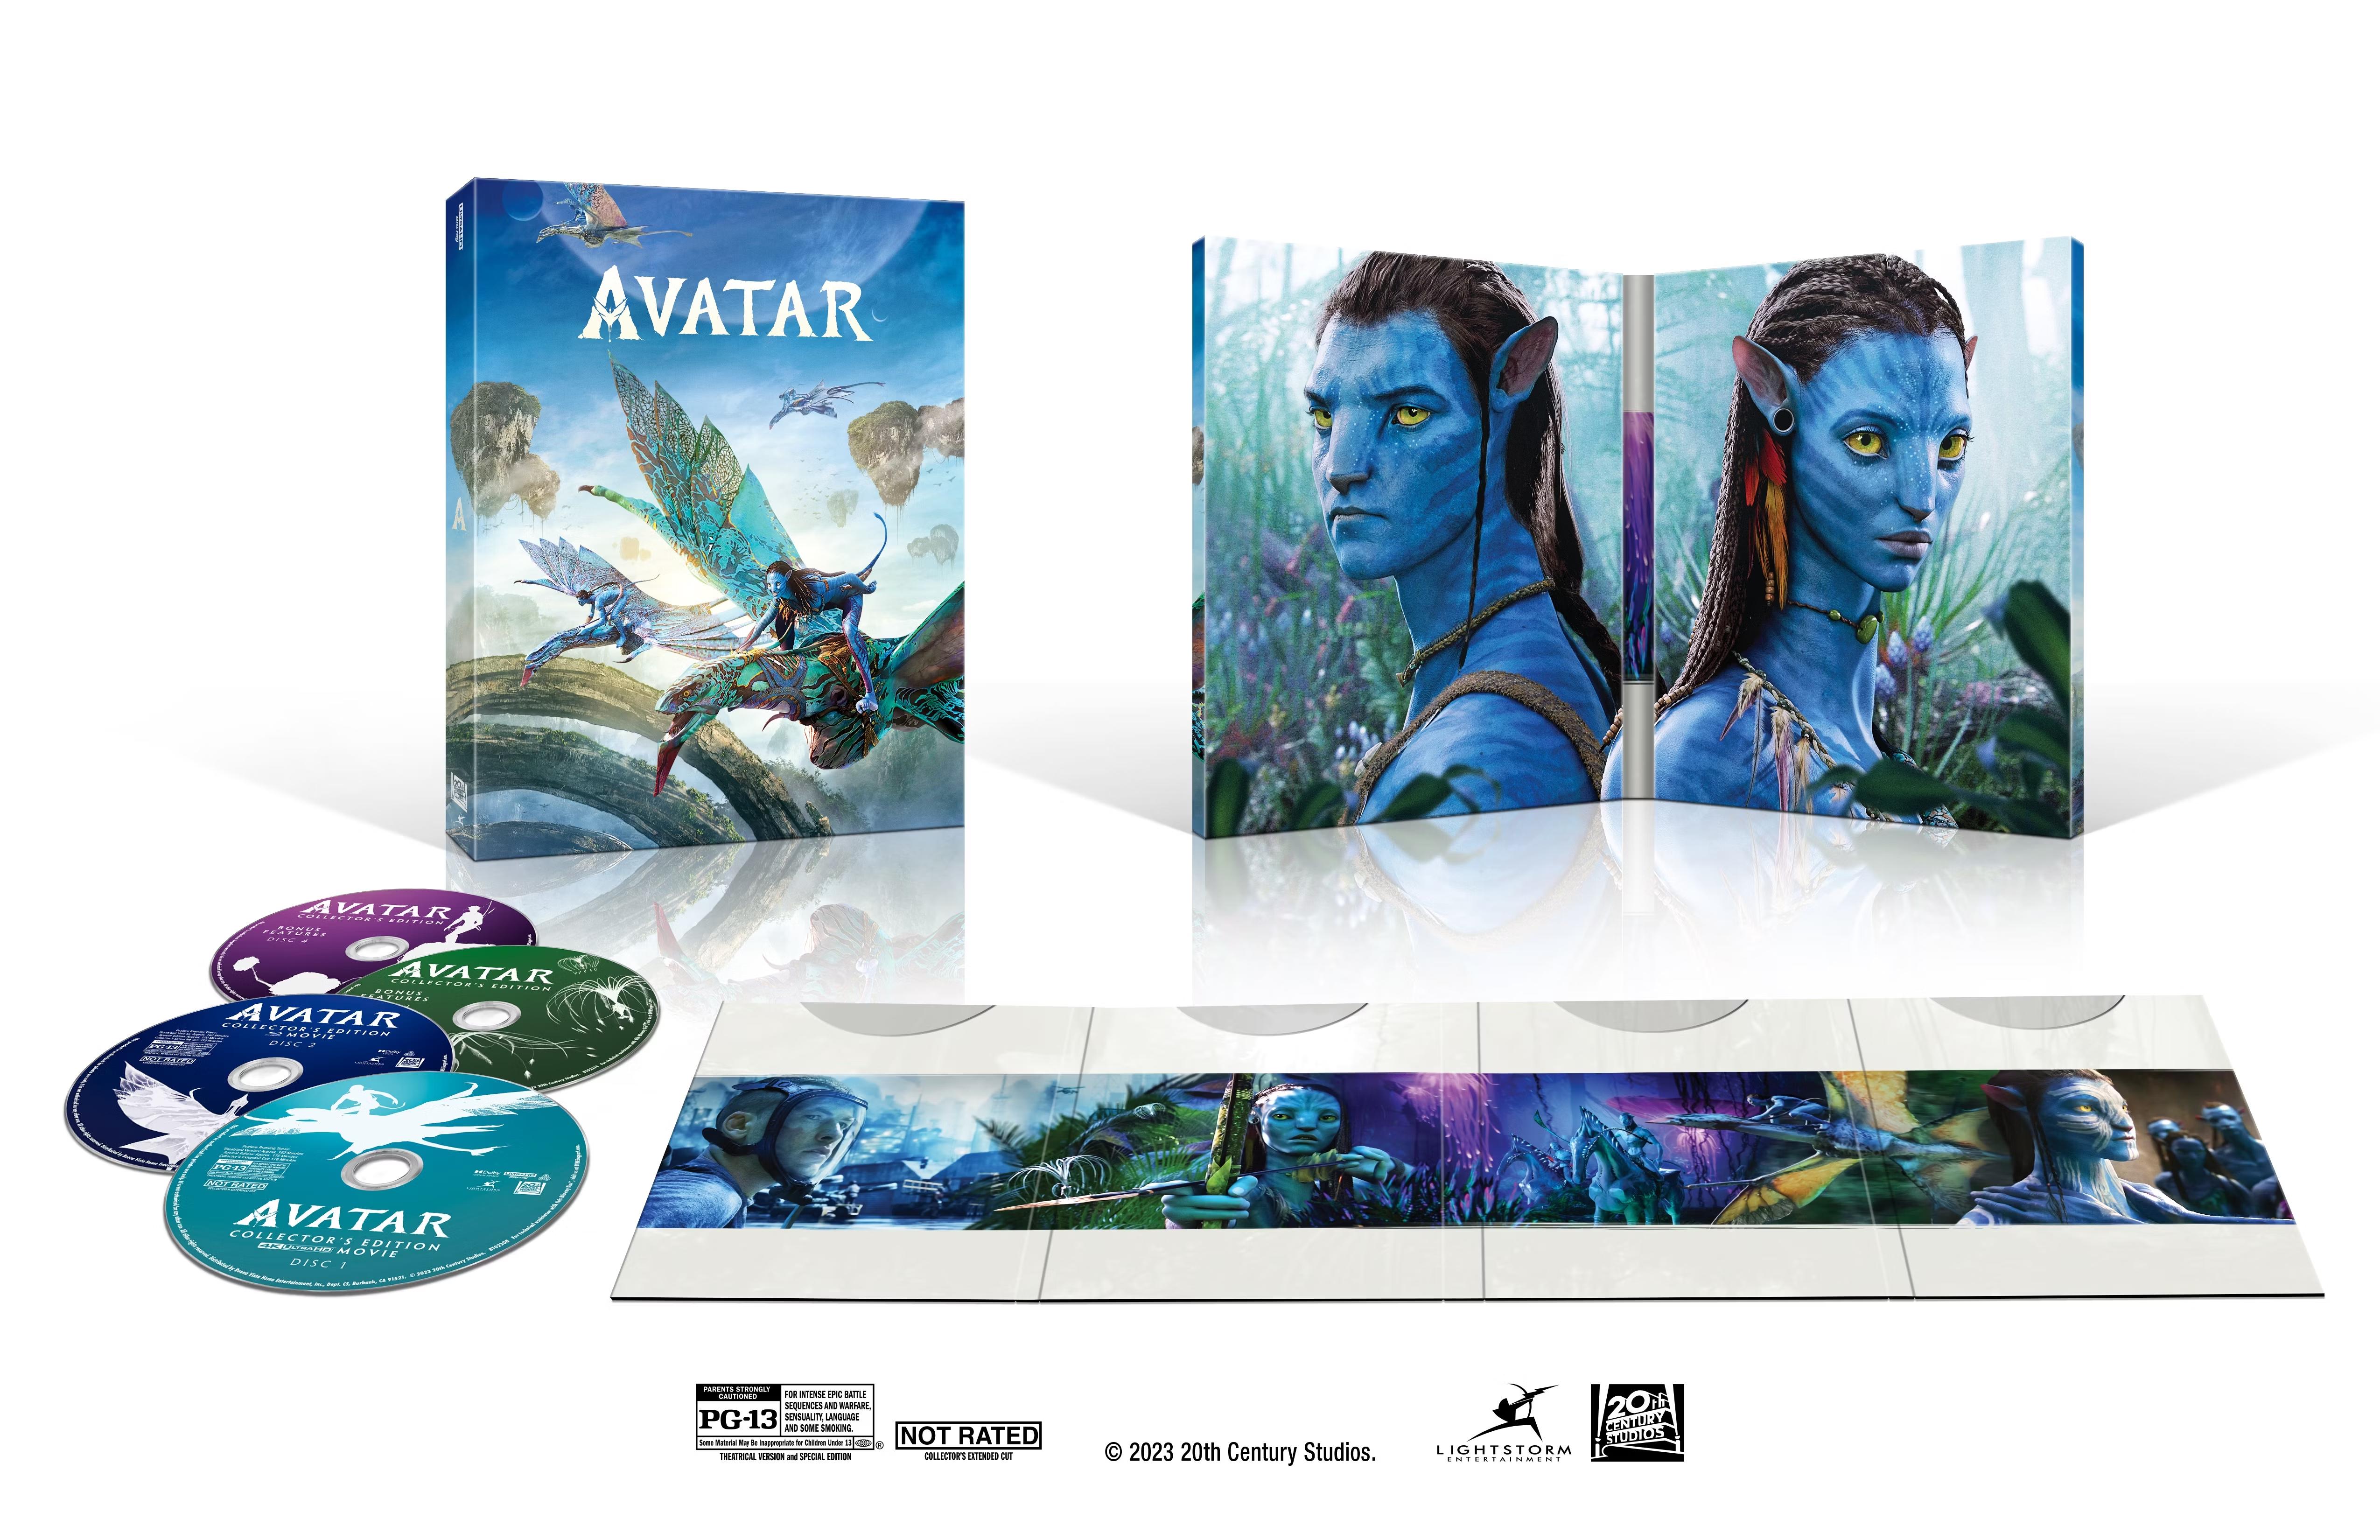 3D Trailer #2 • Avatar 2: The Way of Water • Dolby 5.1 • 4K UHD 